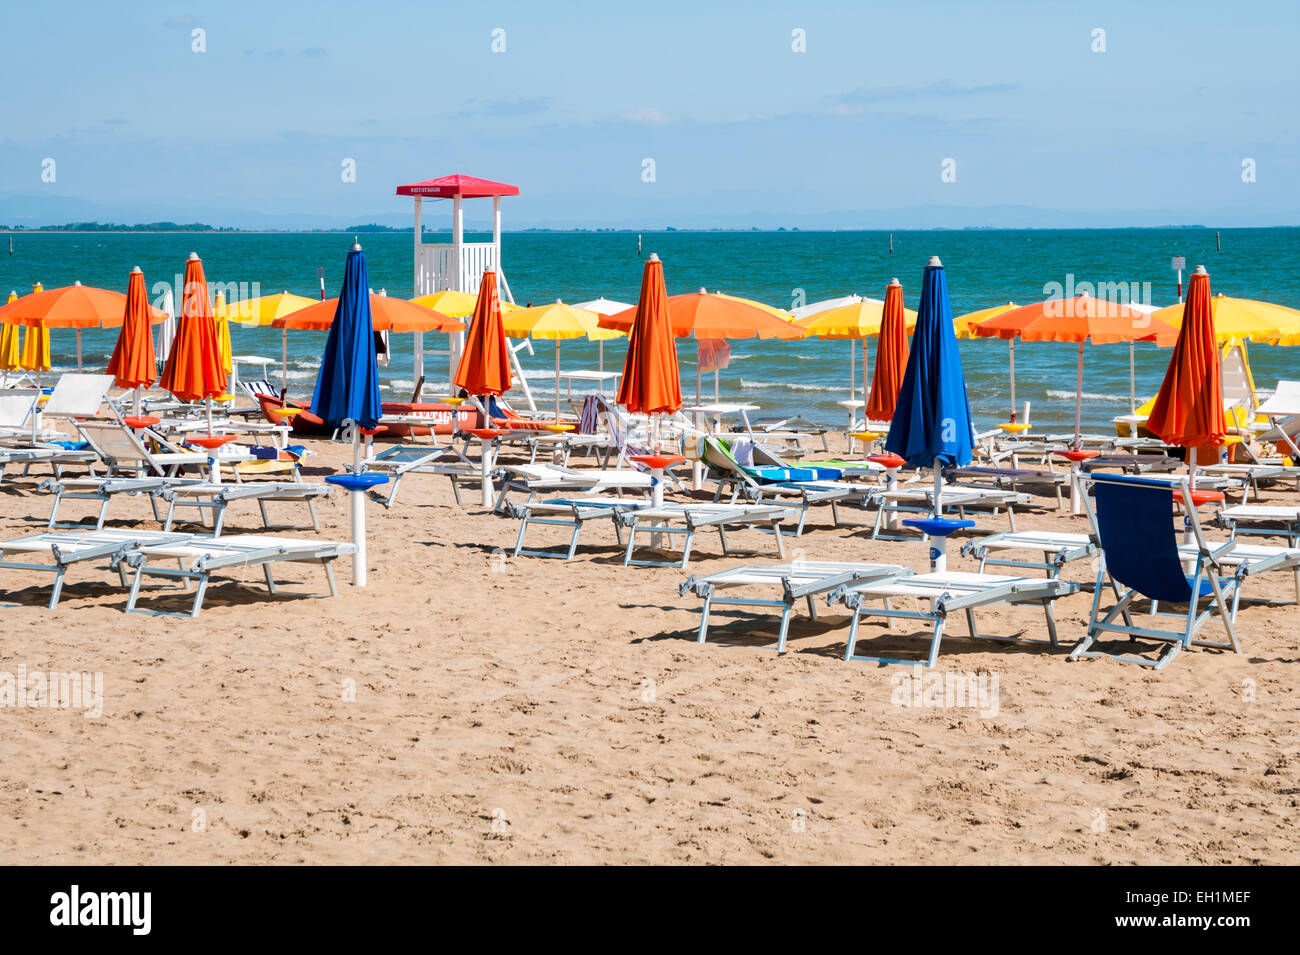 Sandy beach with colorful umbrellas, chairs and lifegard tower Stock Photo